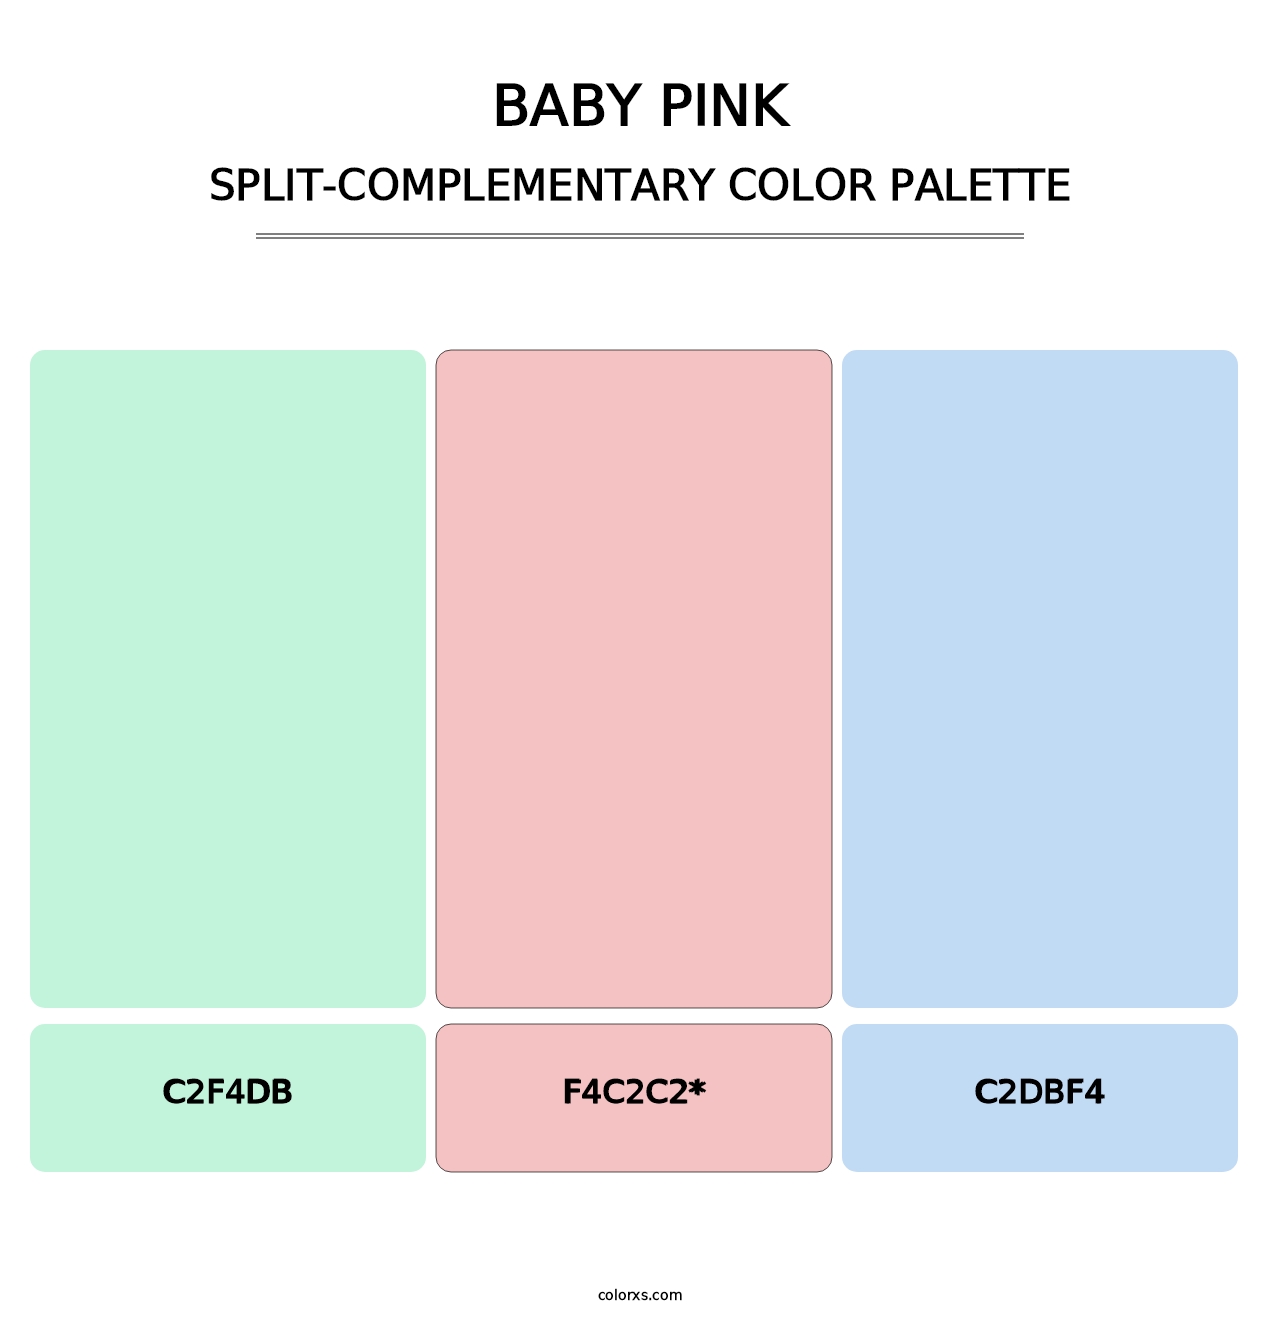 Baby Pink - Split-Complementary Color Palette